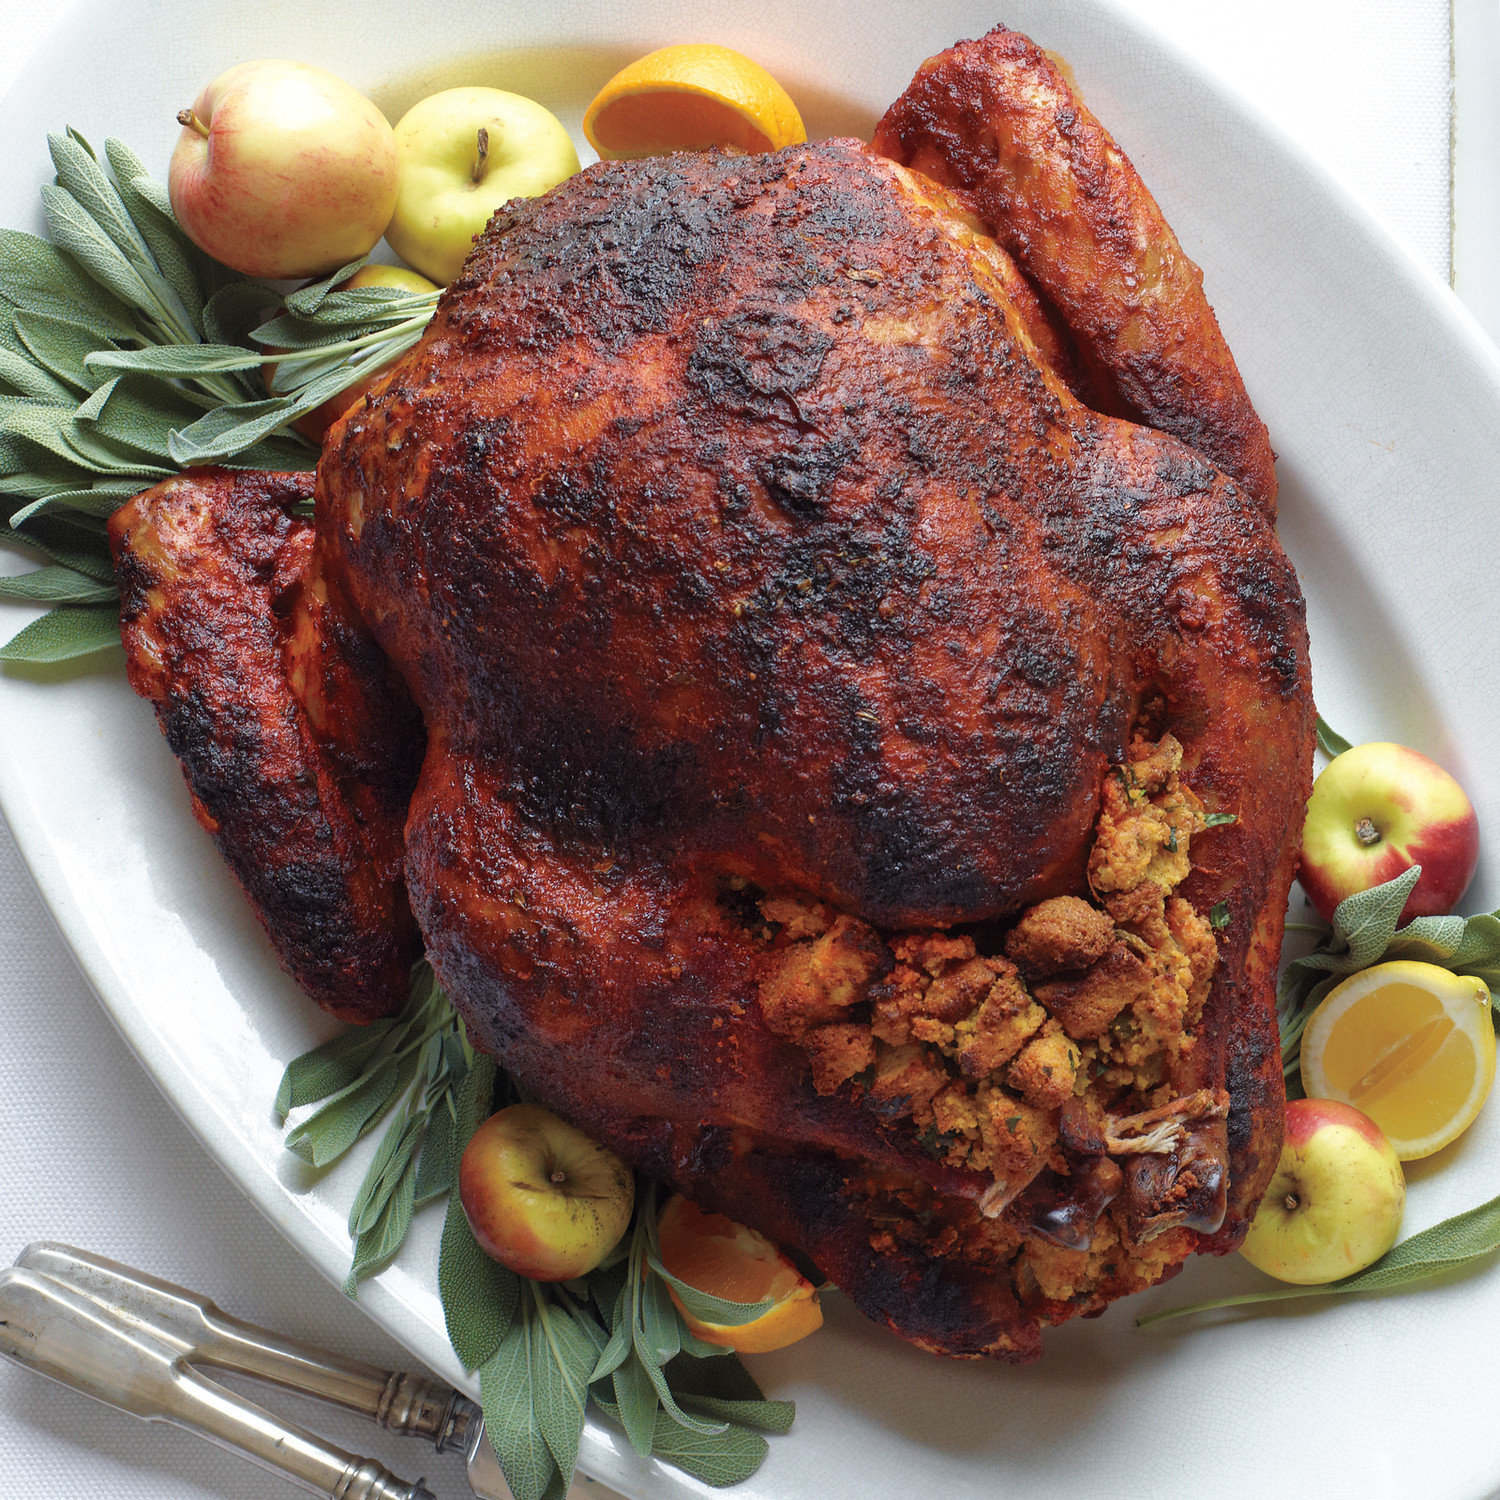 Recipes For Thanksgiving Turkey
 Citrus Rubbed Turkey with Cider Gravy